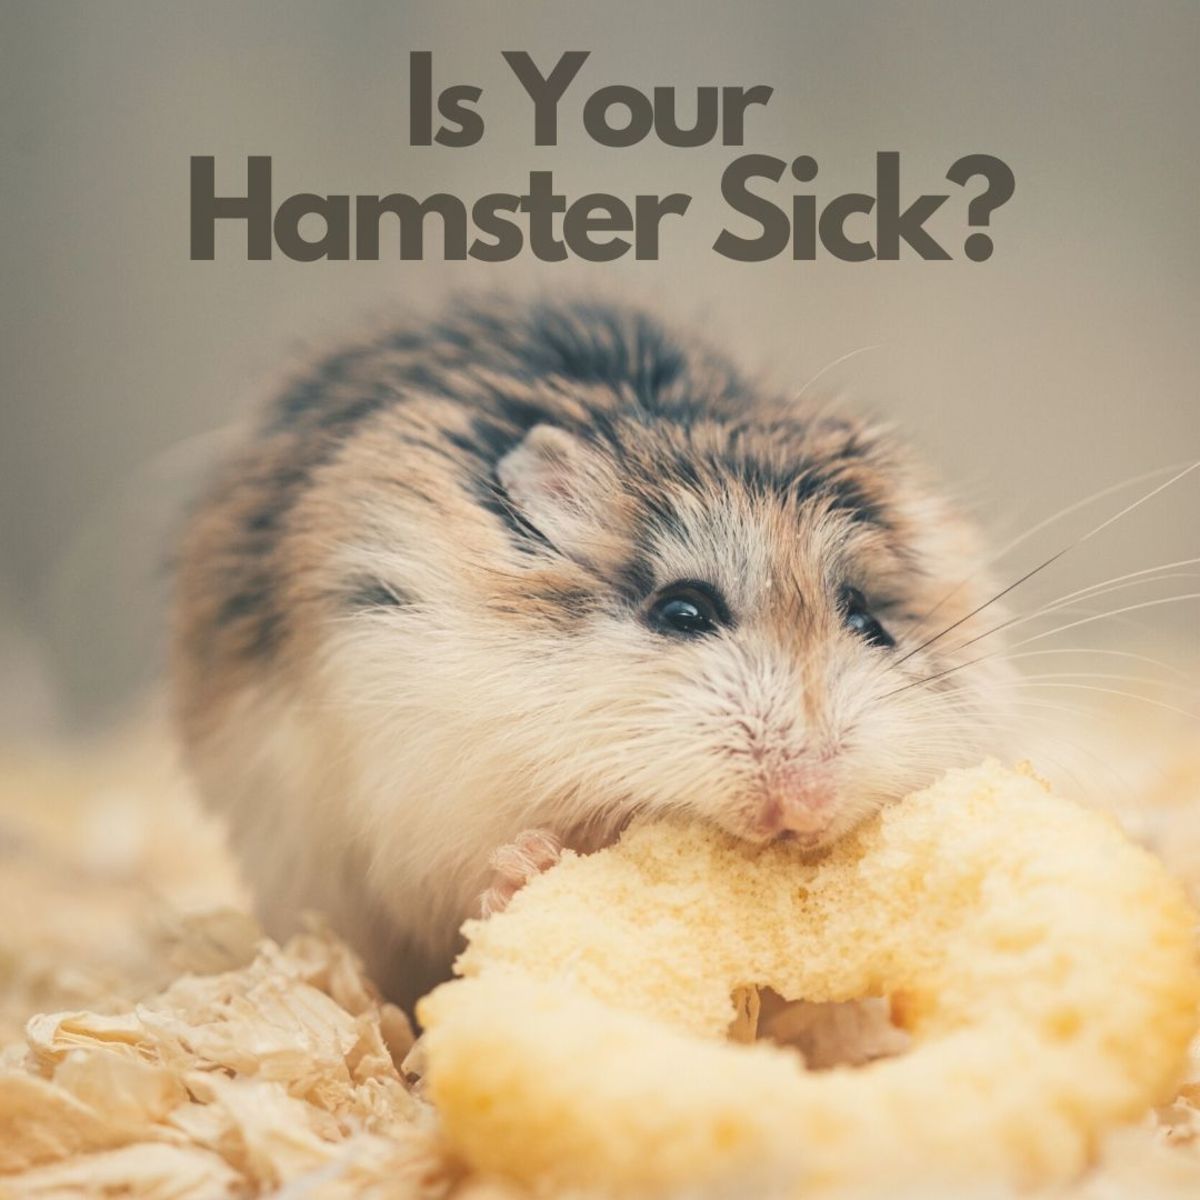 Do you know how to handle allergies in hamsters?